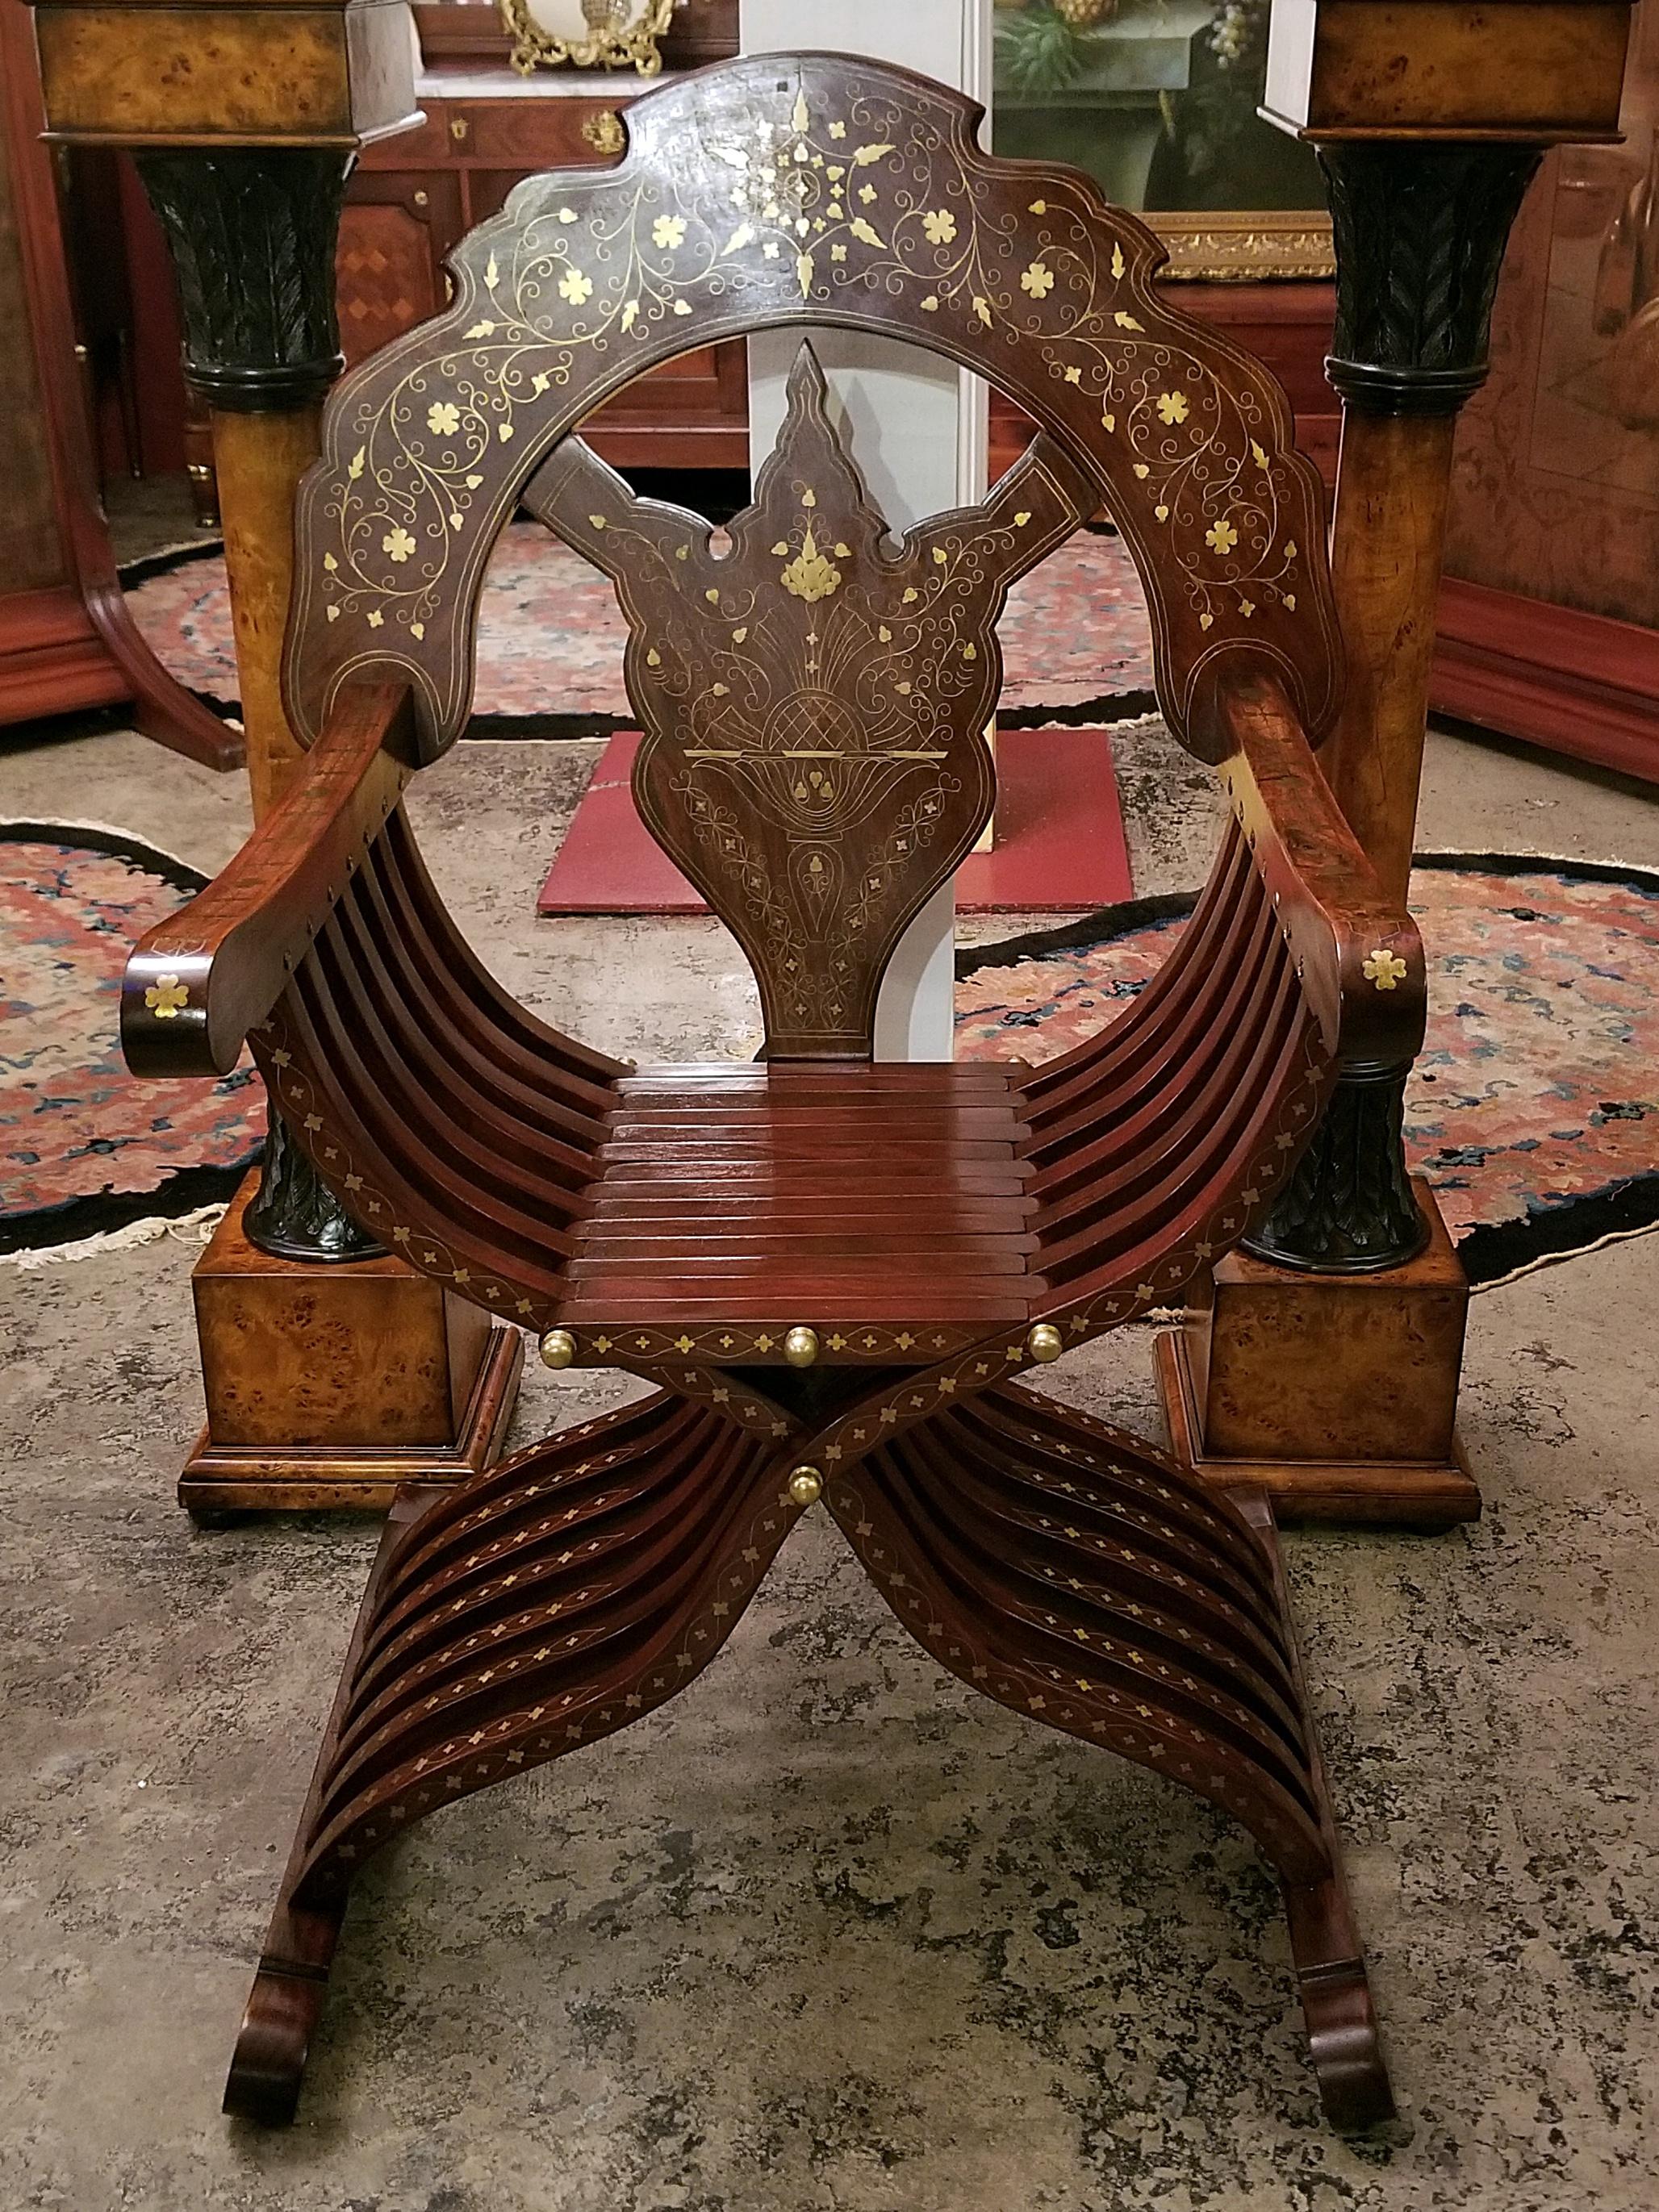 PRESENTING a GORGEOUS Middle Eastern Brass Inlaid Savonarola Chair.

20th Century, probably circa 1960-1980.

Teak inlaid with brass in floral and geometric patterns.

Probably made in Pakistan or one of the Middle Eastern countries … a region